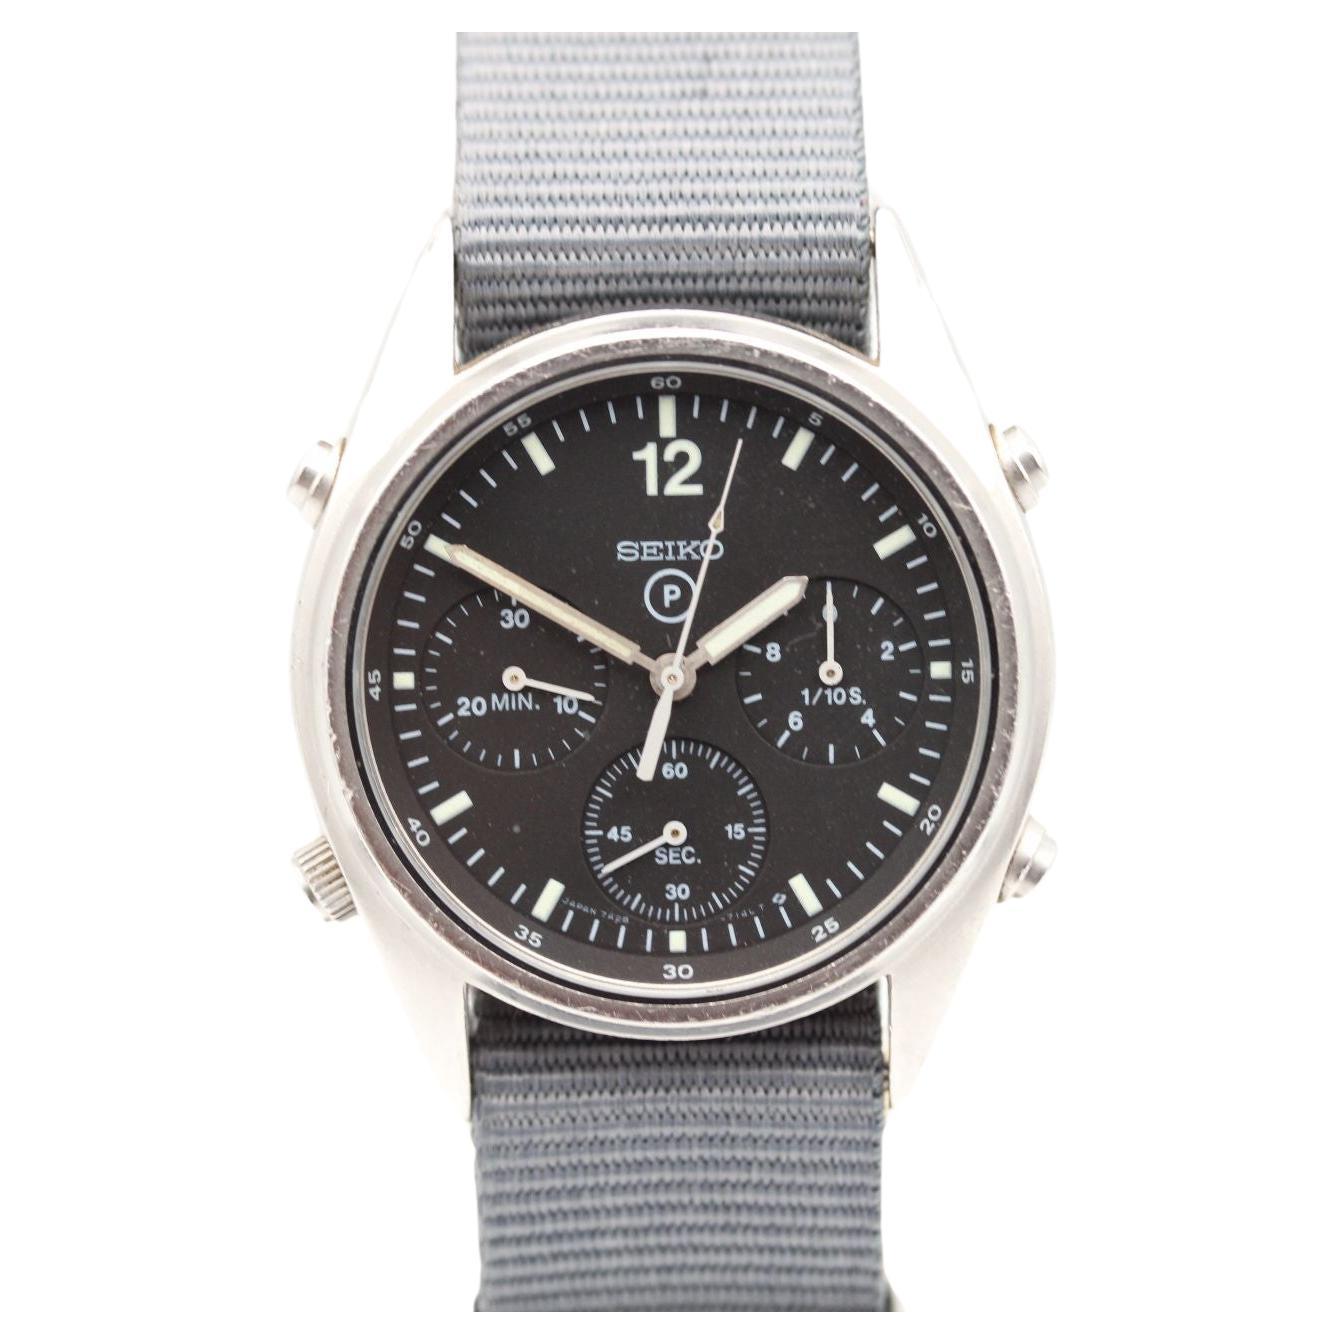 Seiko Generation 2 - 7T27-7A20 British Military Issued Watch For Sale